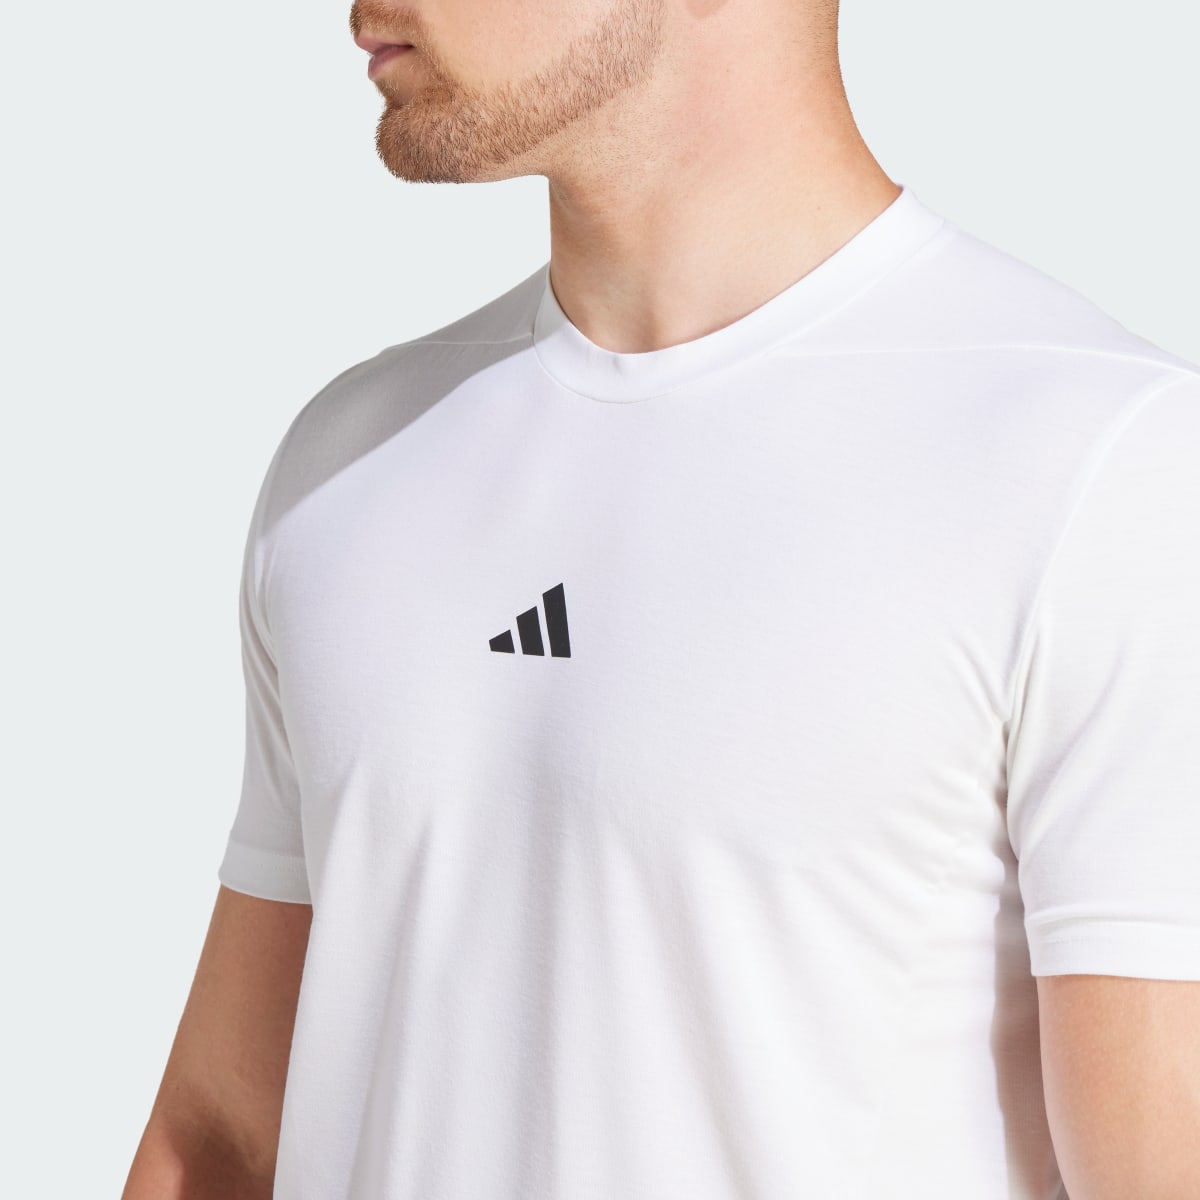 Adidas Designed for Training Workout Tee. 6